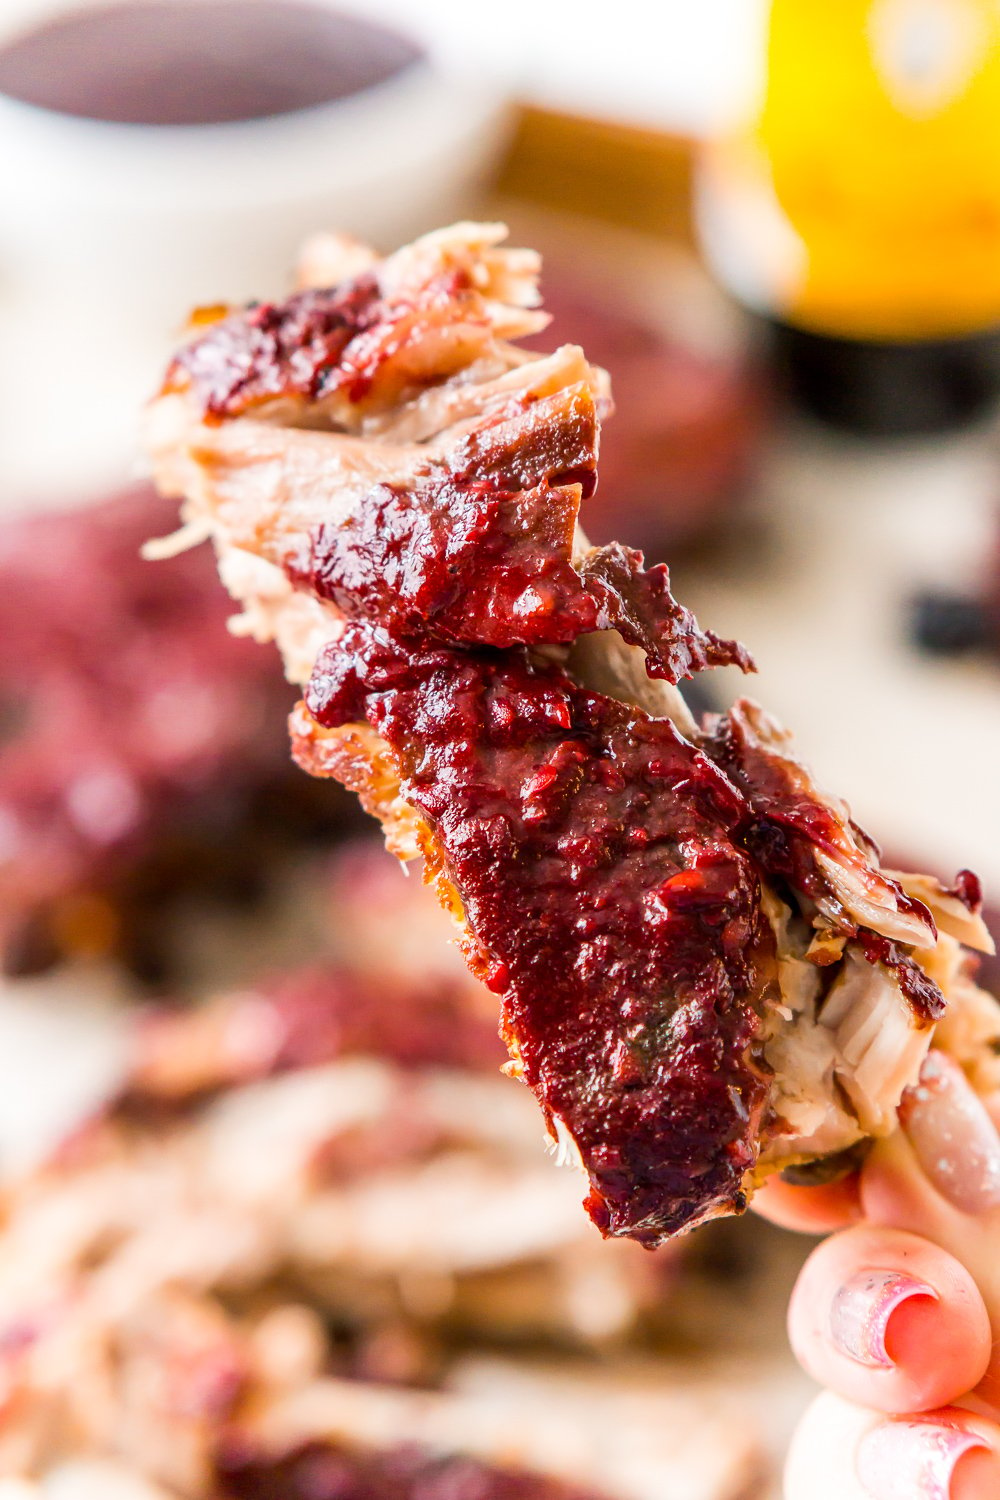 These Crock Pot Ribs are juicy, tender, and full of flavor! Easy to make and messy to eat, these baby back ribs are smothered in a sweet blackberry barbecue sauce! Perfect for game days!